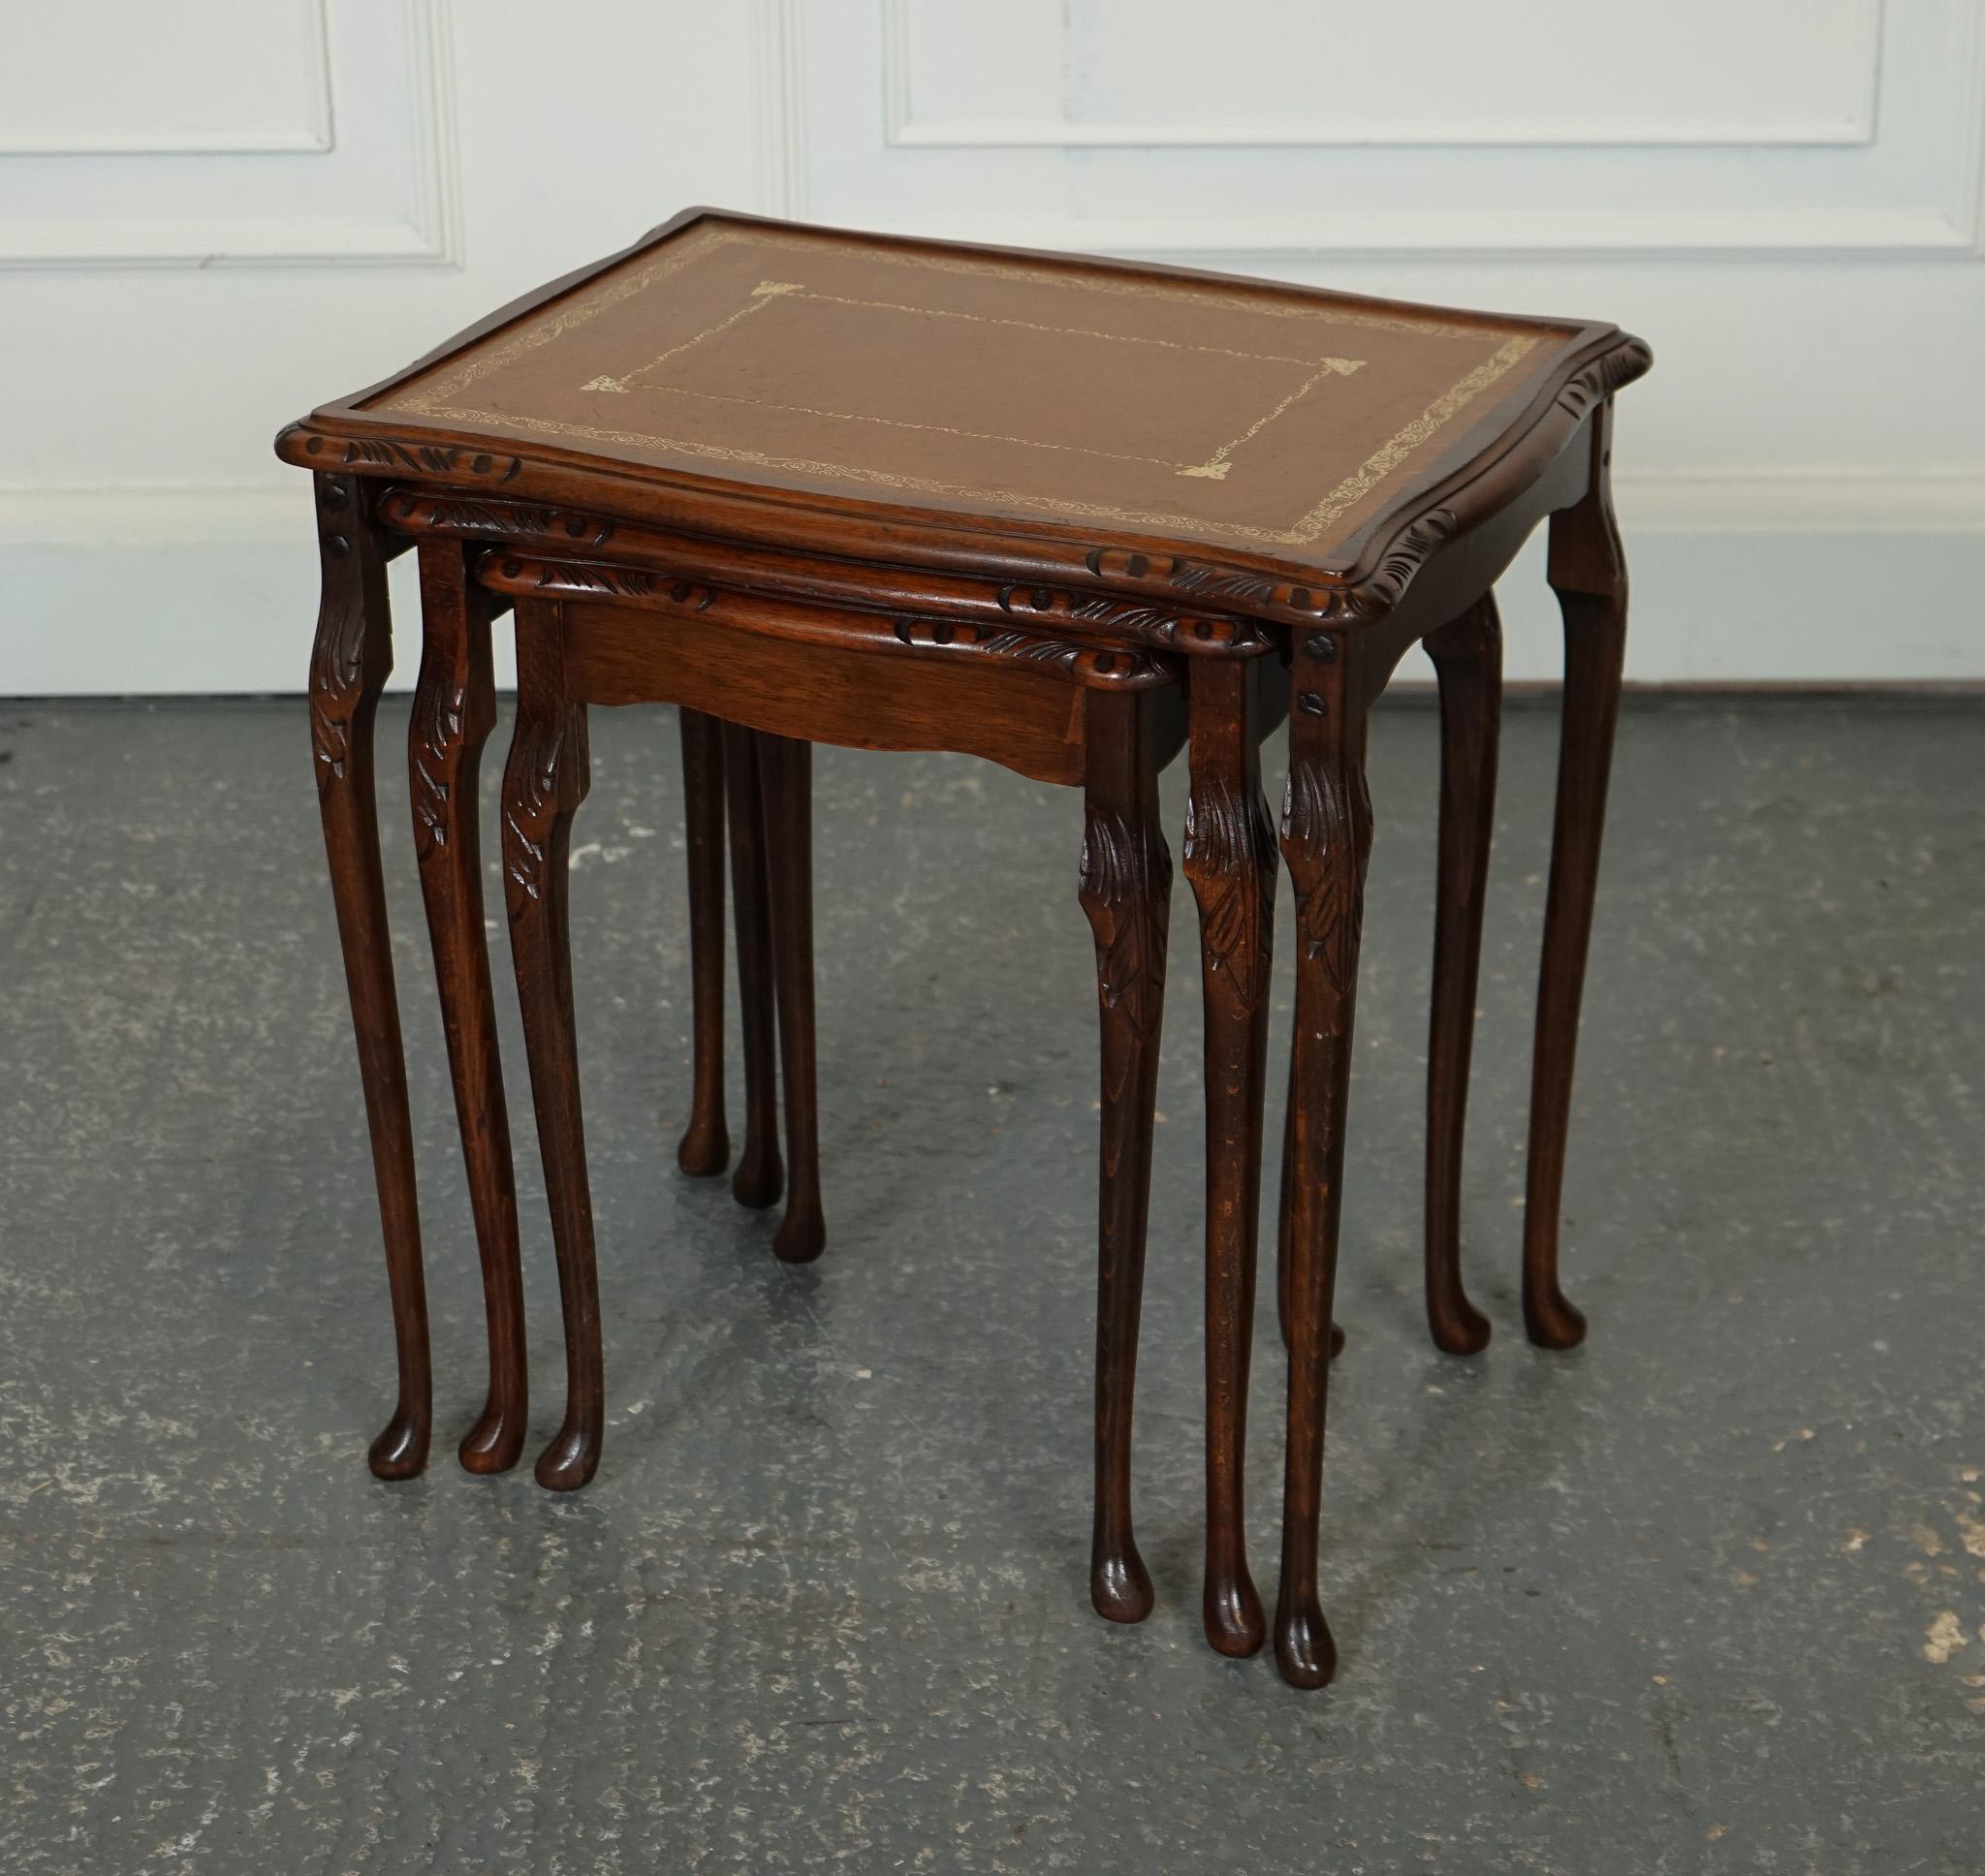 VINTAGE NEST OF TABLES QUEEN ANNE  Style LEGS WiTH BROWN EMBOSsed LEATHER TOP J1 im Zustand „Gut“ im Angebot in Pulborough, GB